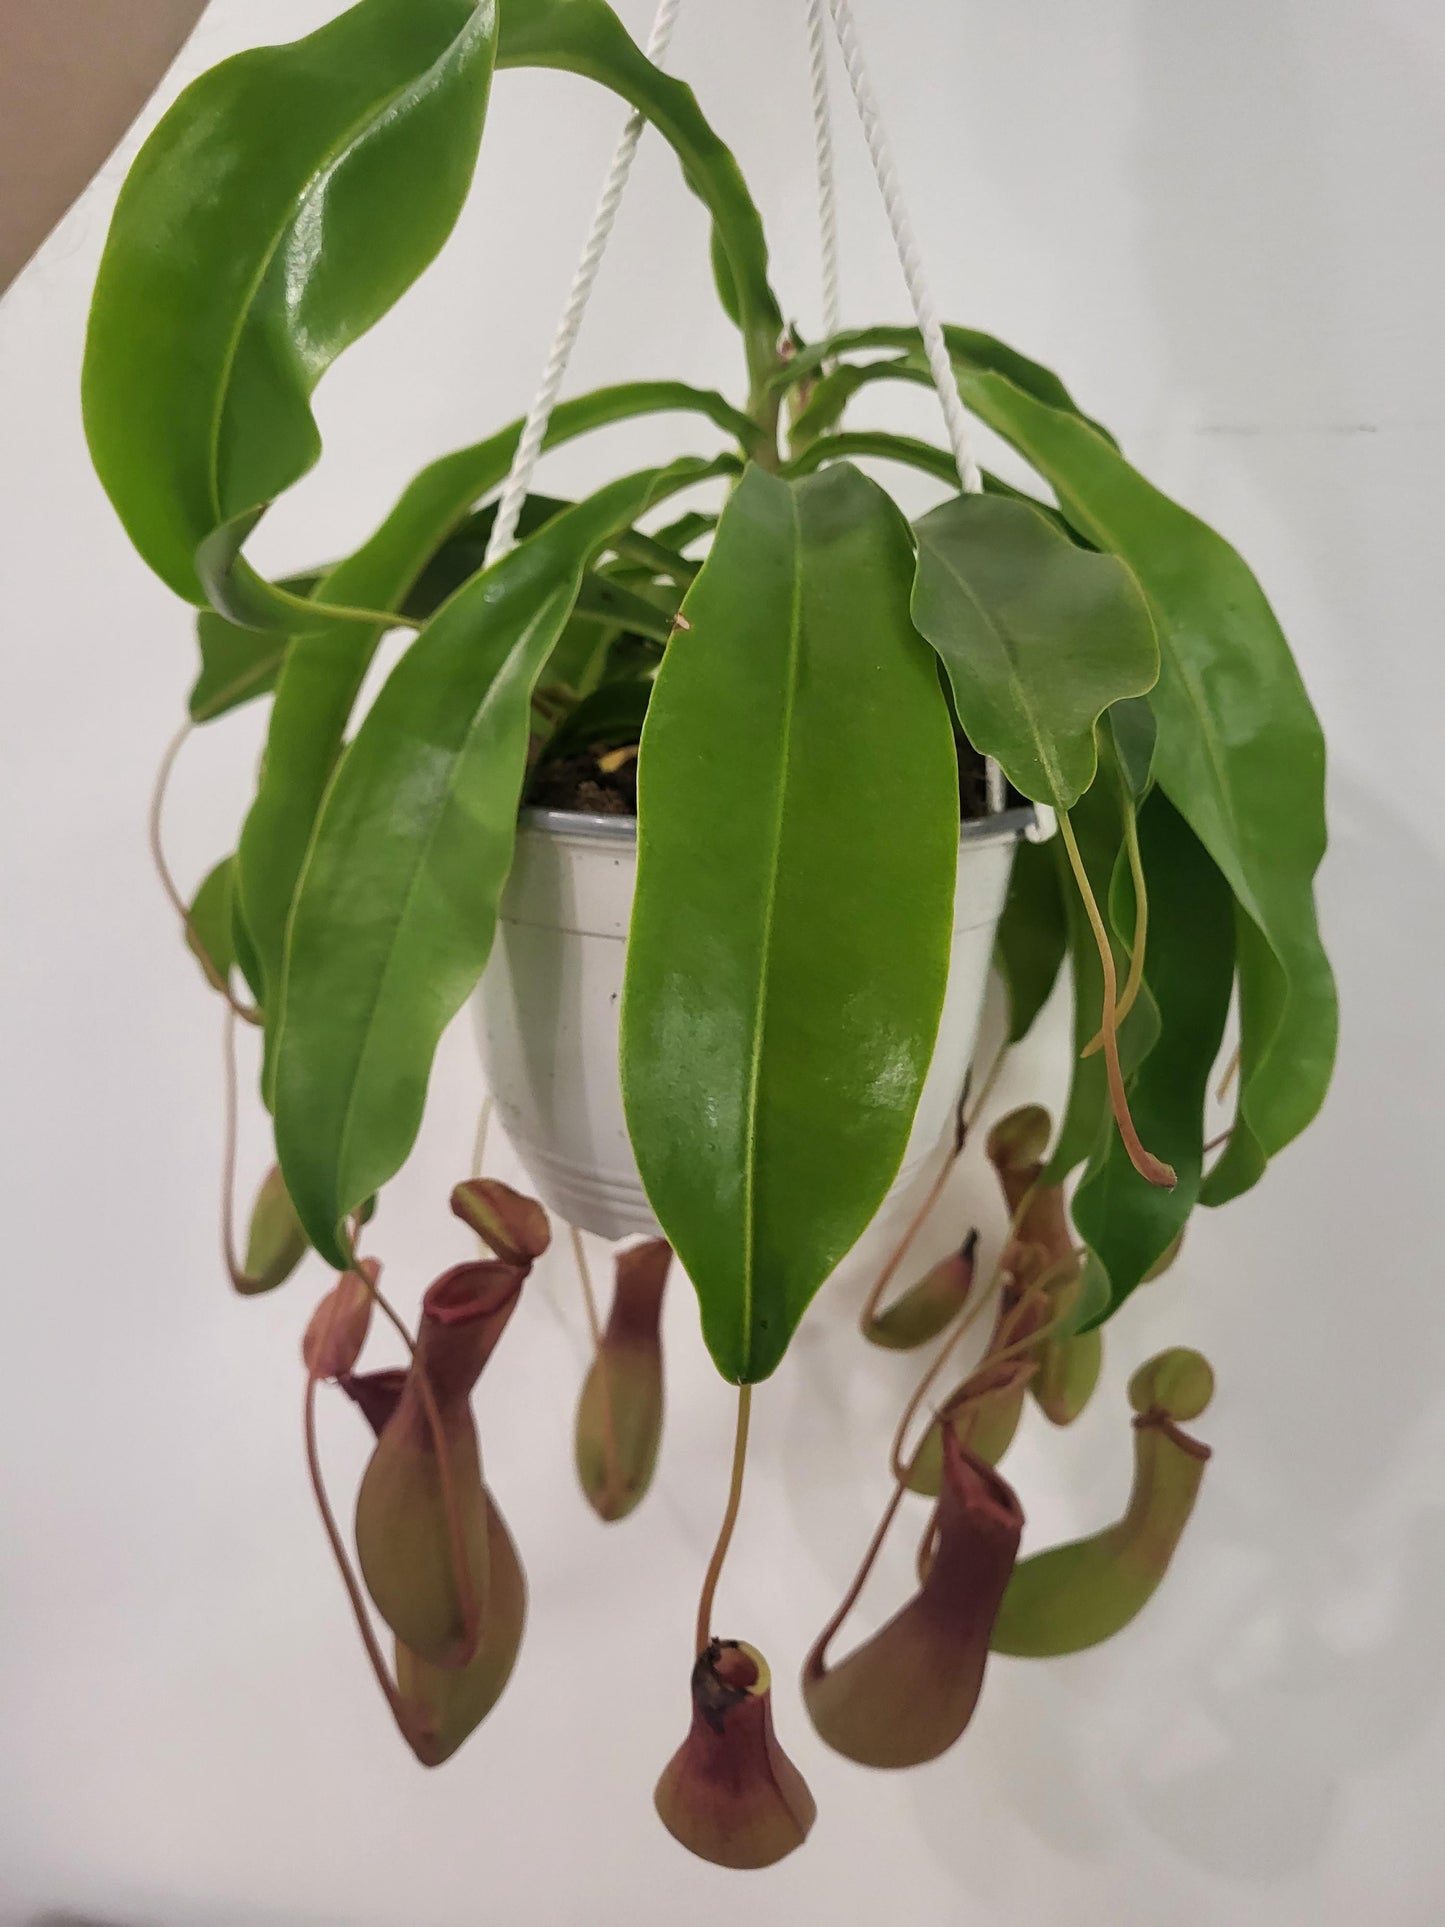 Nepenthes alata - Pitcher plant